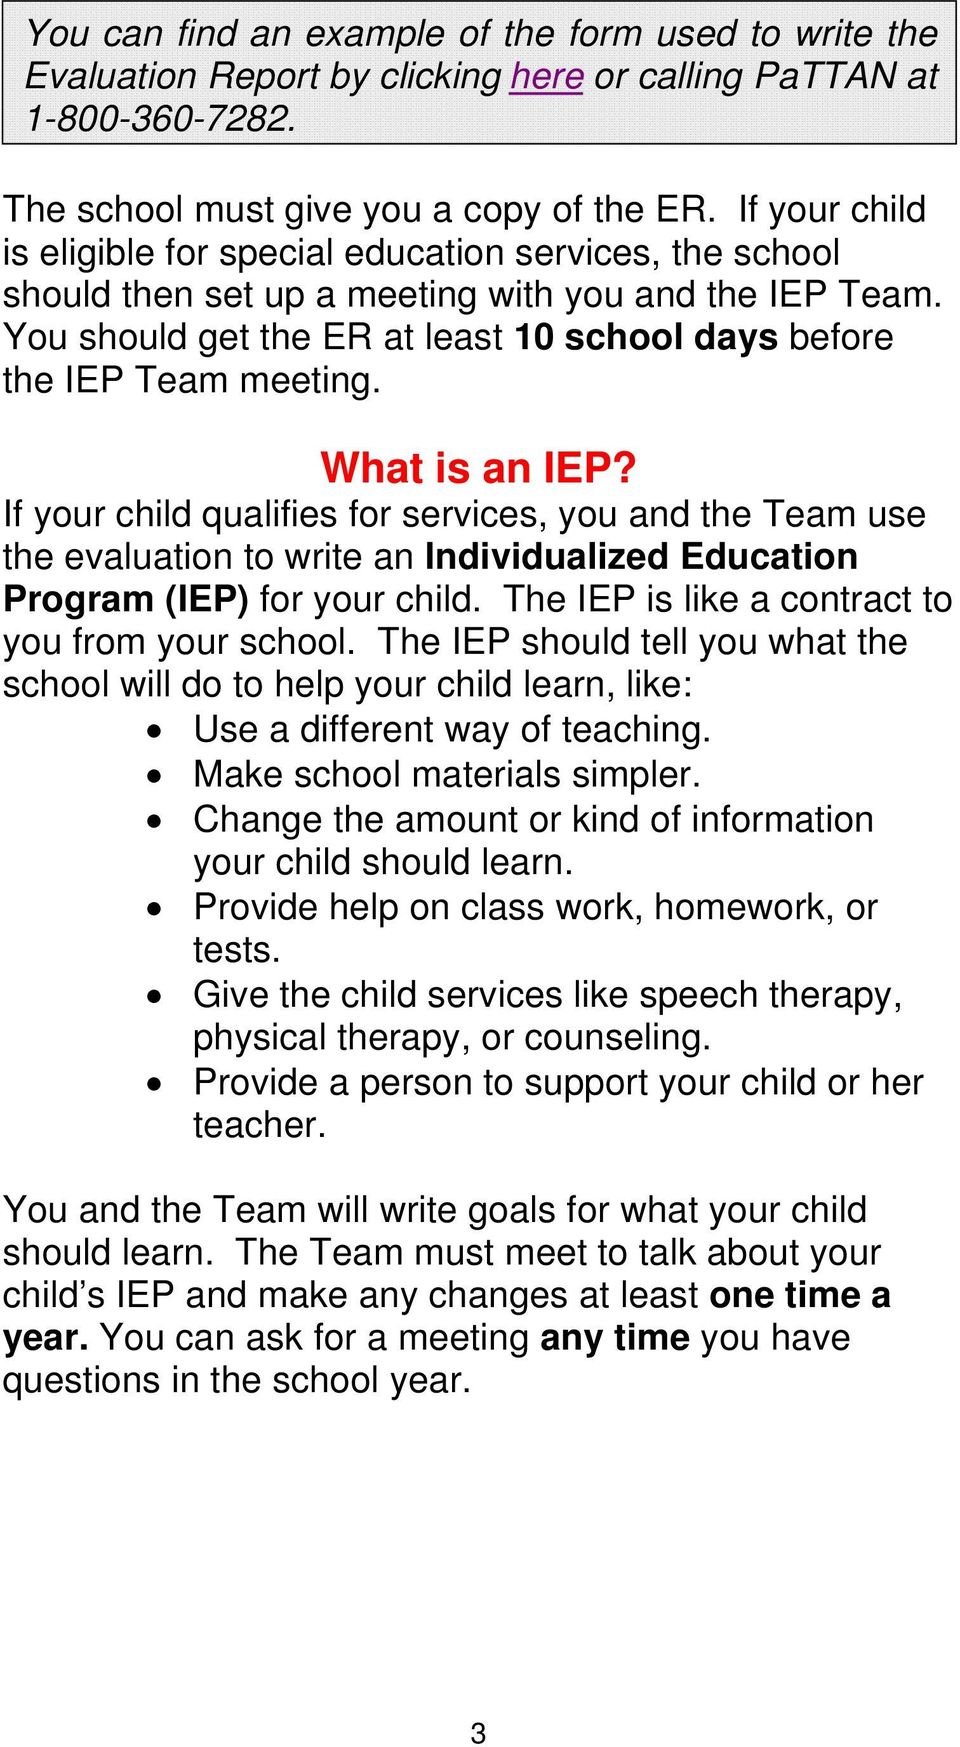 What is an IEP? If your child qualifies for services, you and the Team use the evaluation to write an Individualized Education Program (IEP) for your child.